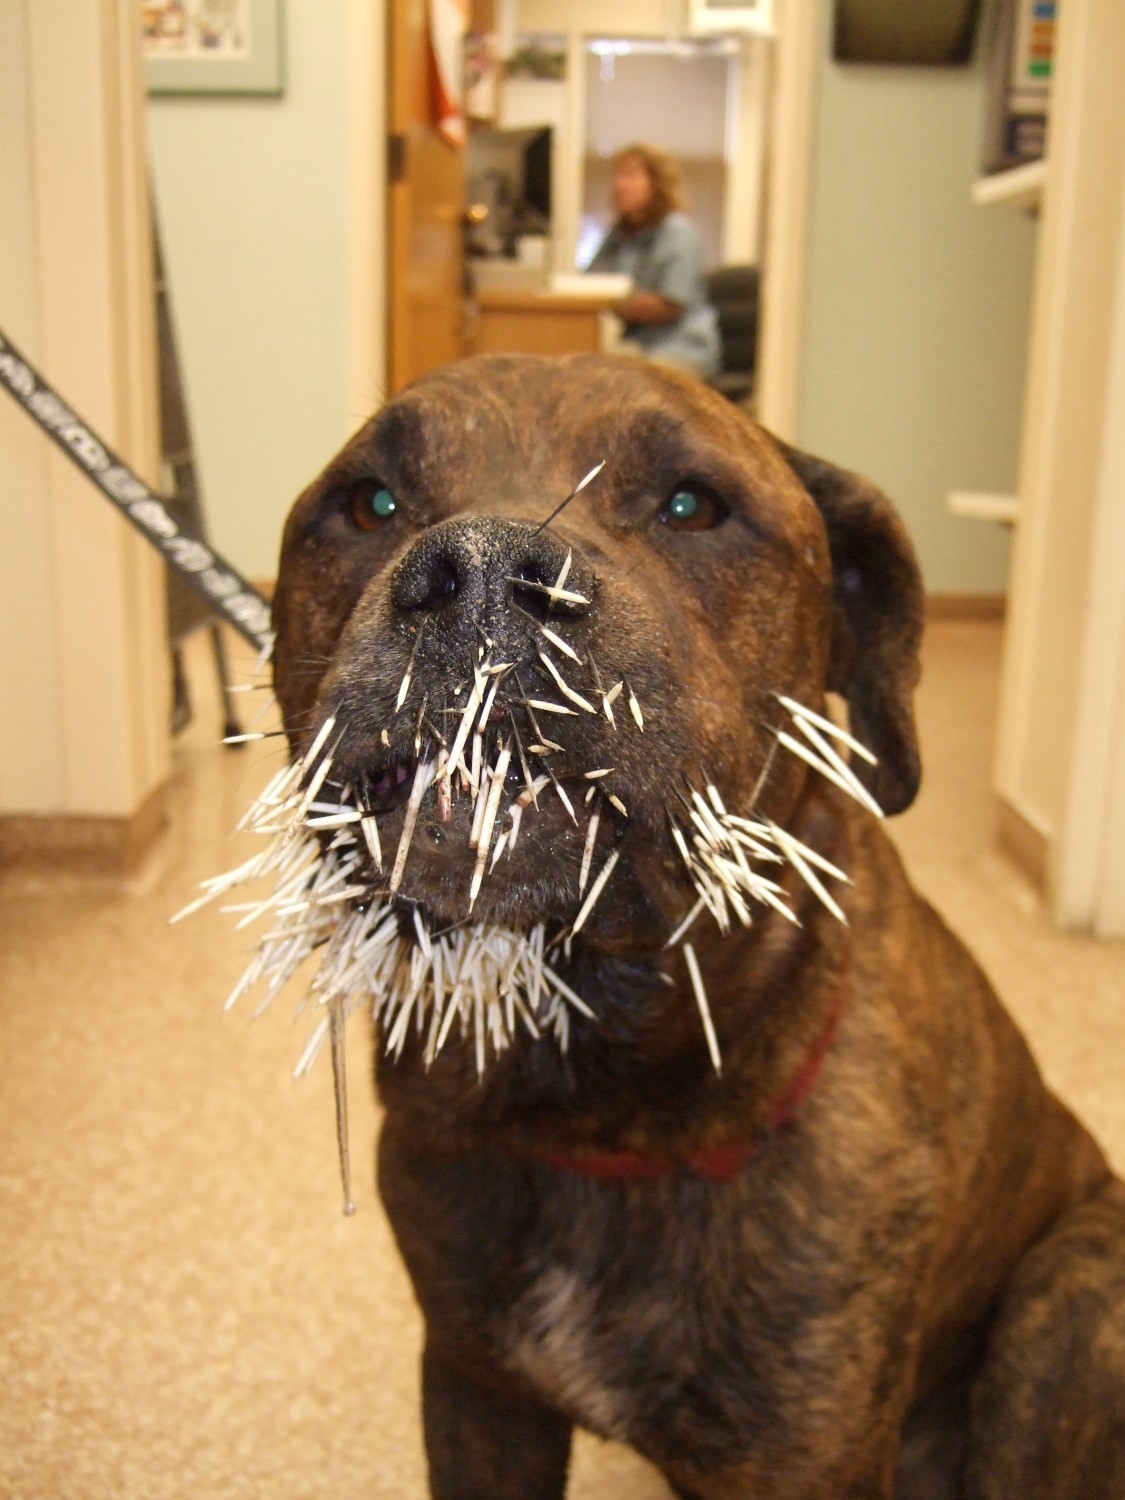 Dog with porcupine quills